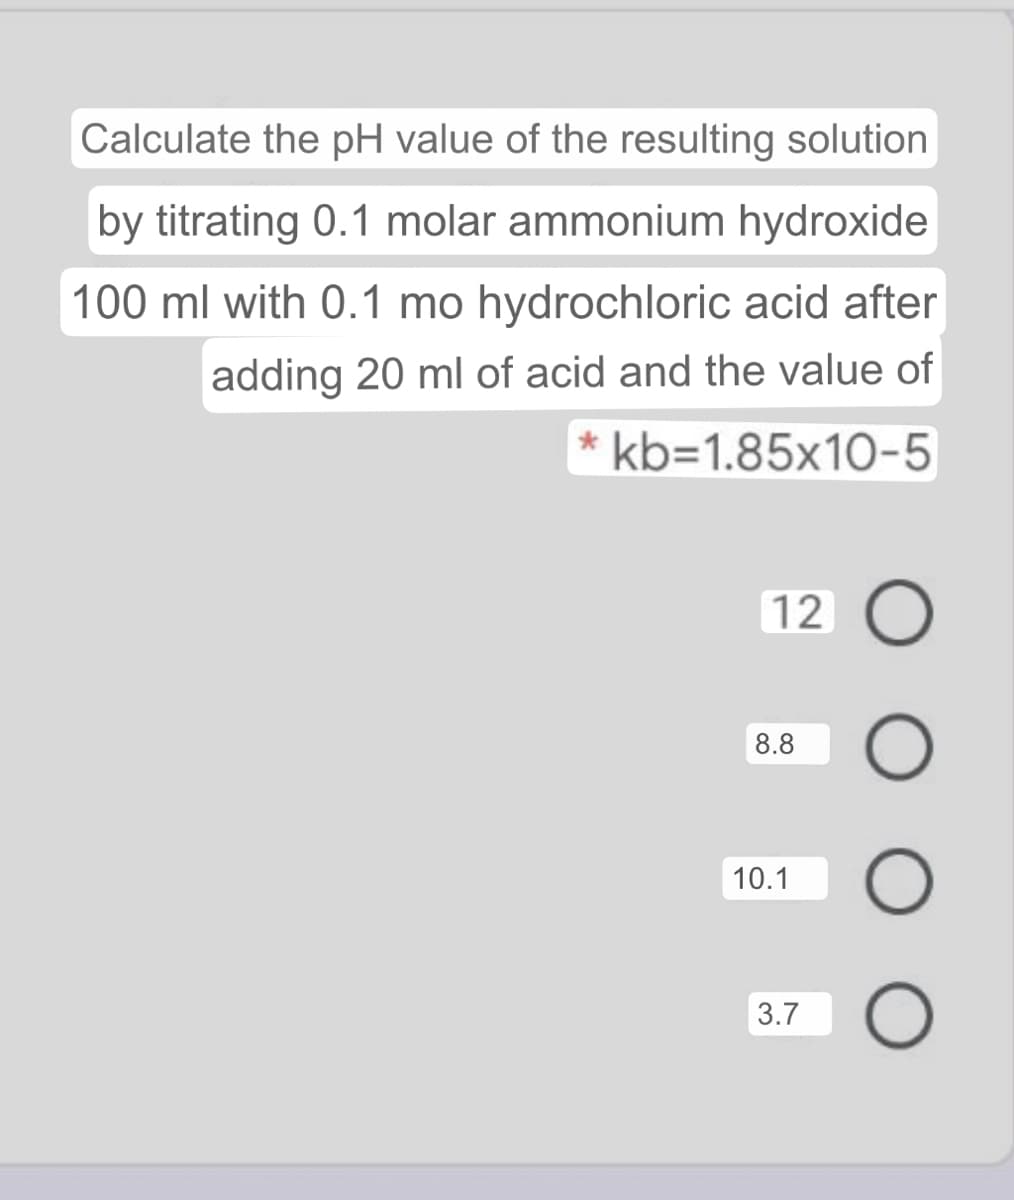 Calculate the pH value of the resulting solution
by titrating 0.1 molar ammonium hydroxide
100 ml with 0.1 mo hydrochloric acid after
adding 20 ml of acid and the value of
kb=1.85x10-5
12
8.8
10.1
3.7
